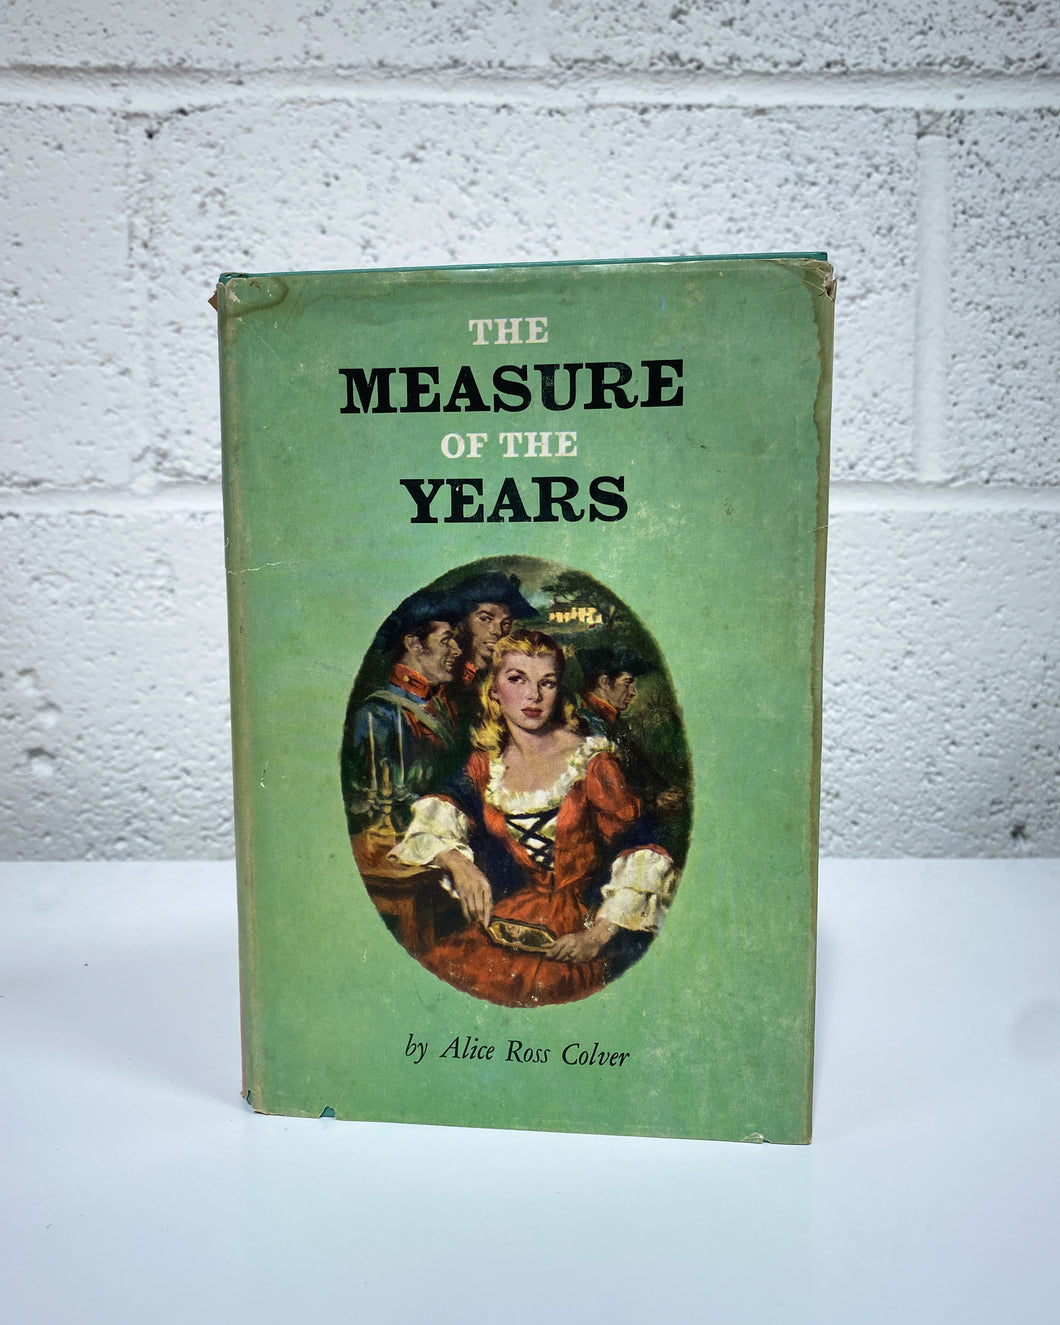 The Measure of the Years by Alice Ross Colver